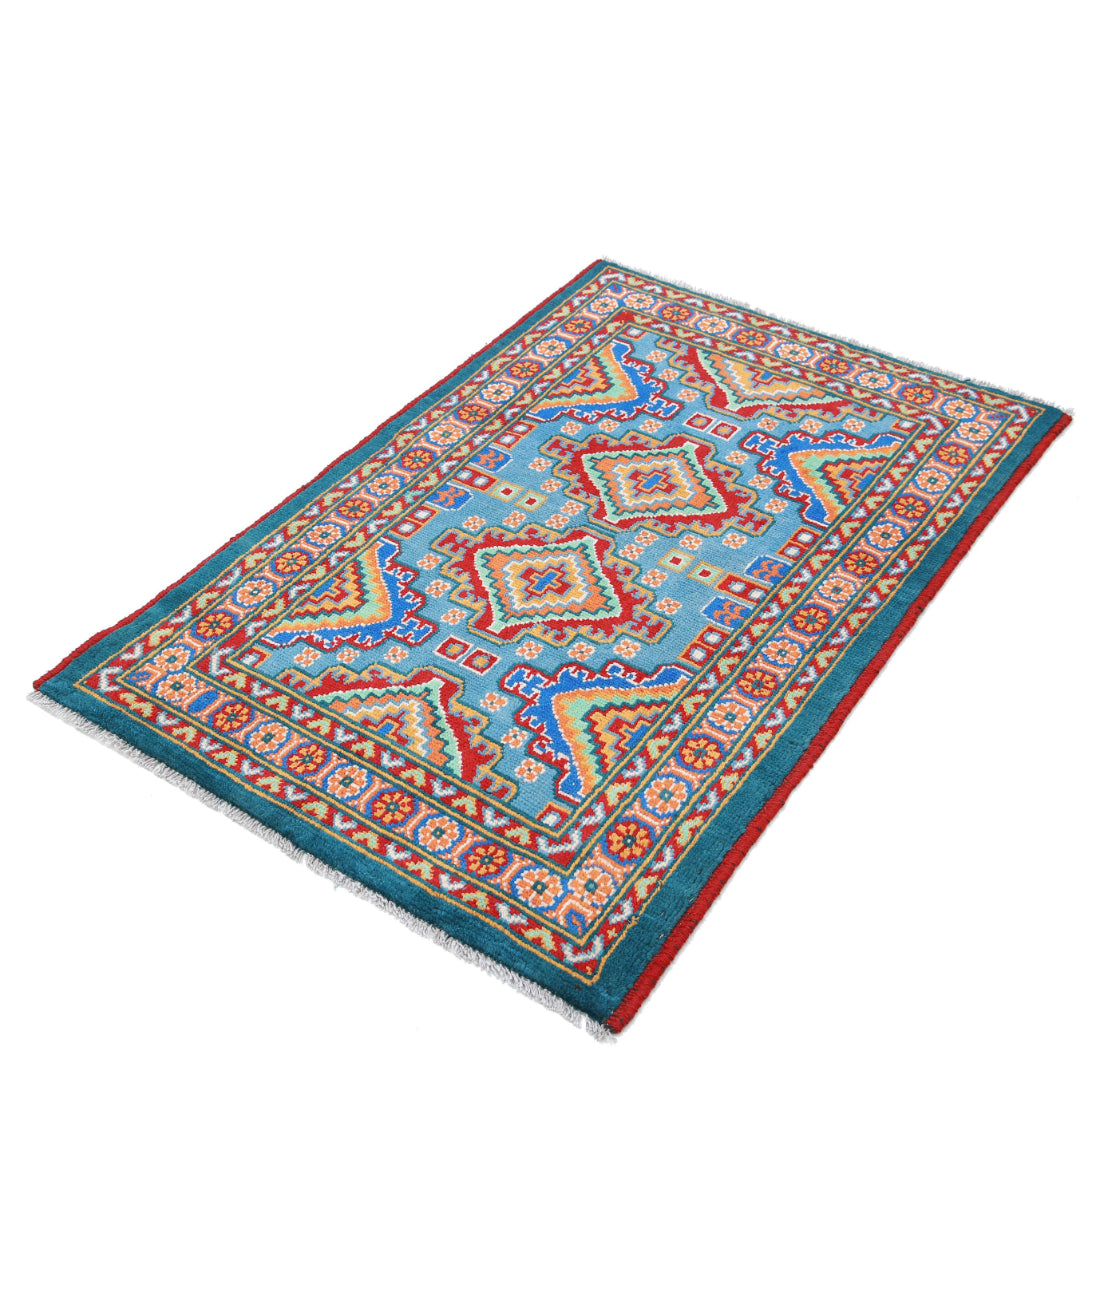 Revival 3'3'' X 4'10'' Hand-Knotted Wool Rug 3'3'' x 4'10'' (98 X 145) / Blue / Red